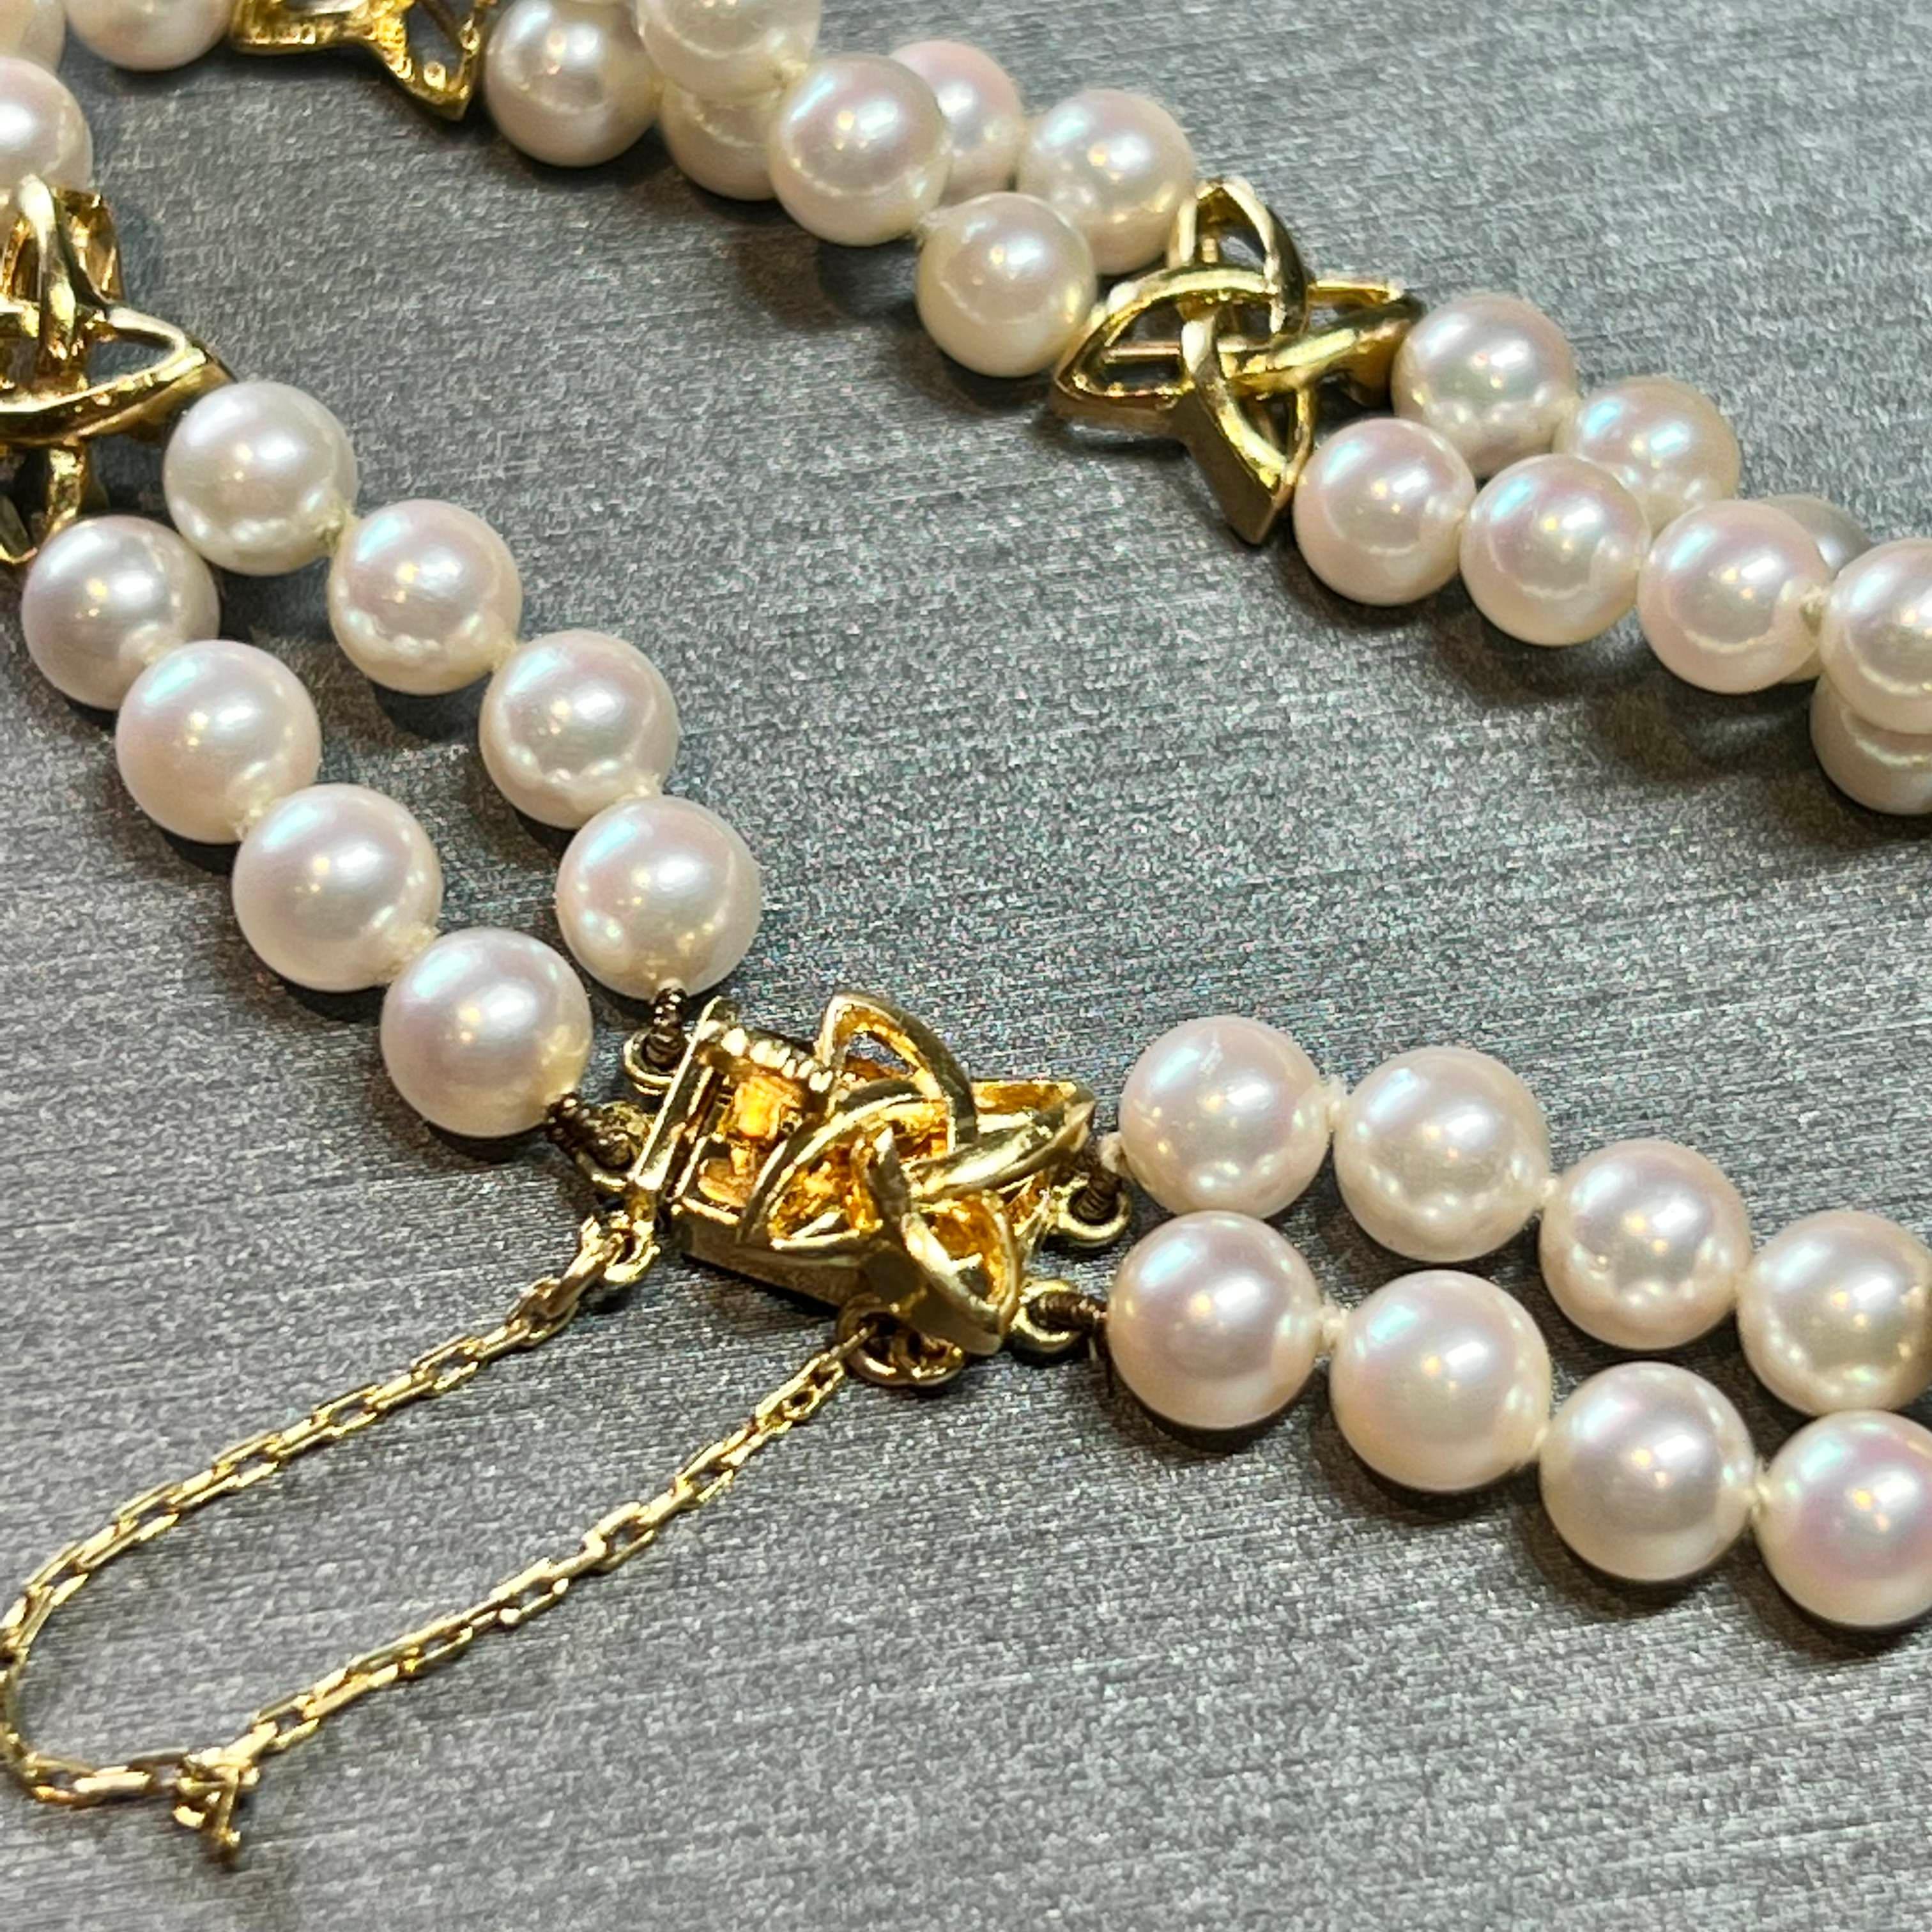 Mikimoto Estate Akoya Pearl Bracelet 18k Gold Certified In Good Condition For Sale In Brooklyn, NY